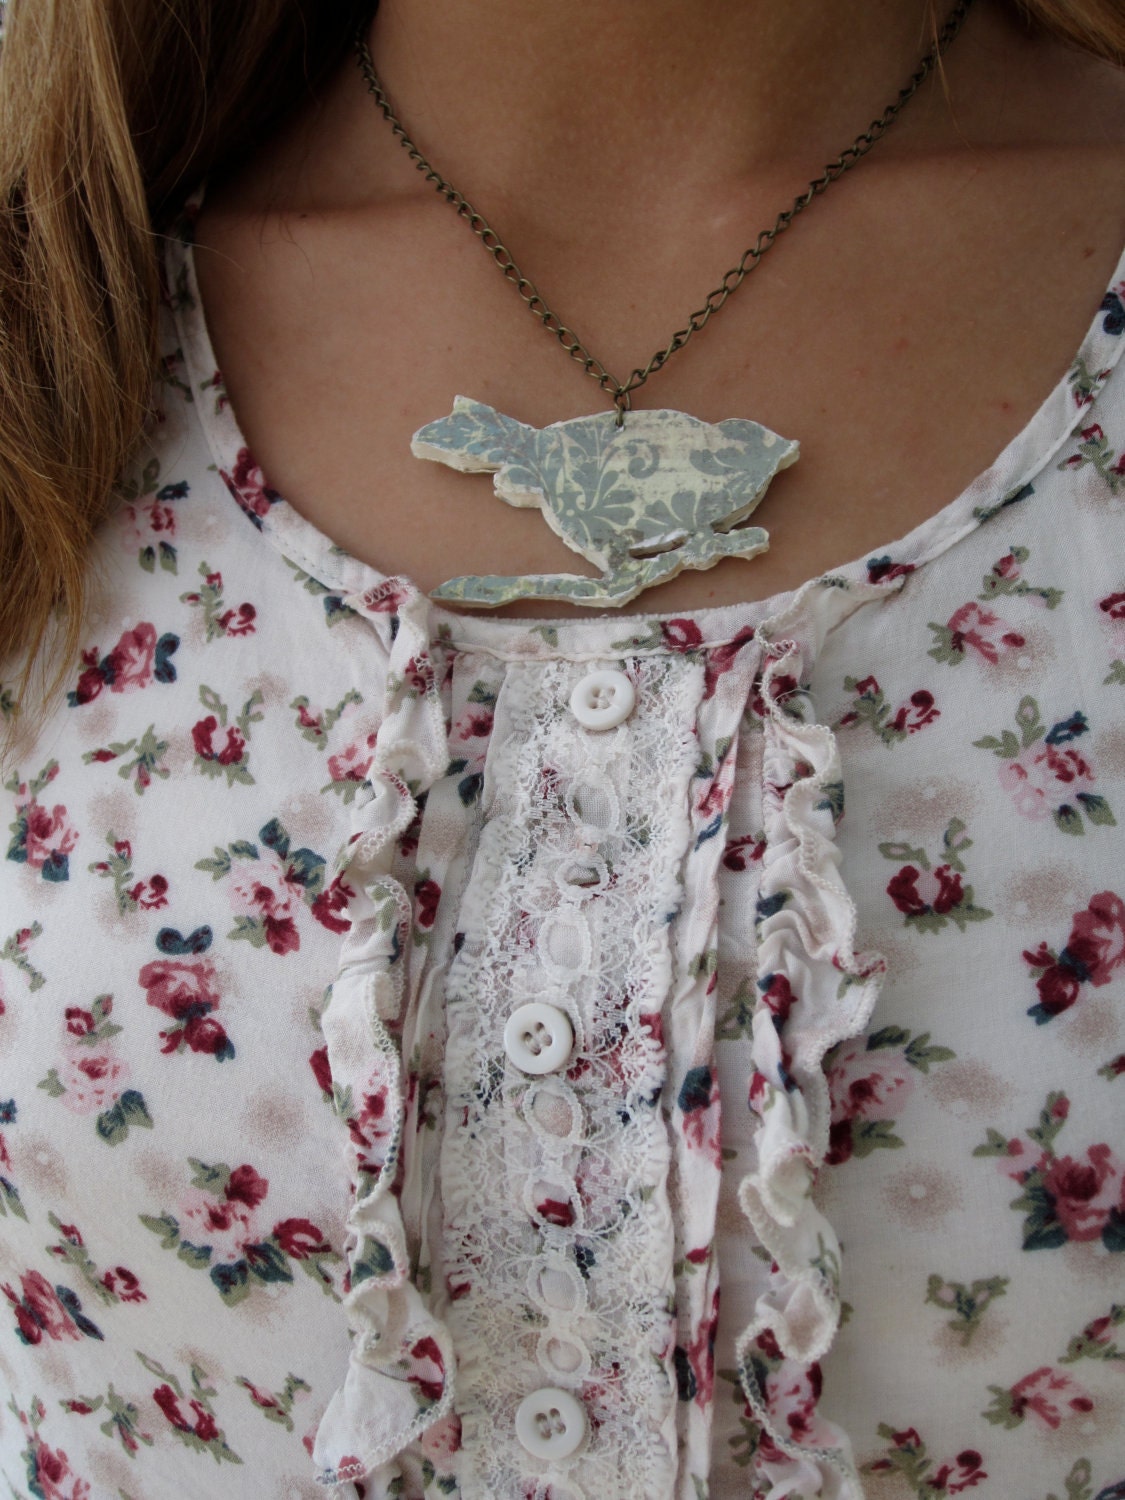 The Perched Bird Necklace